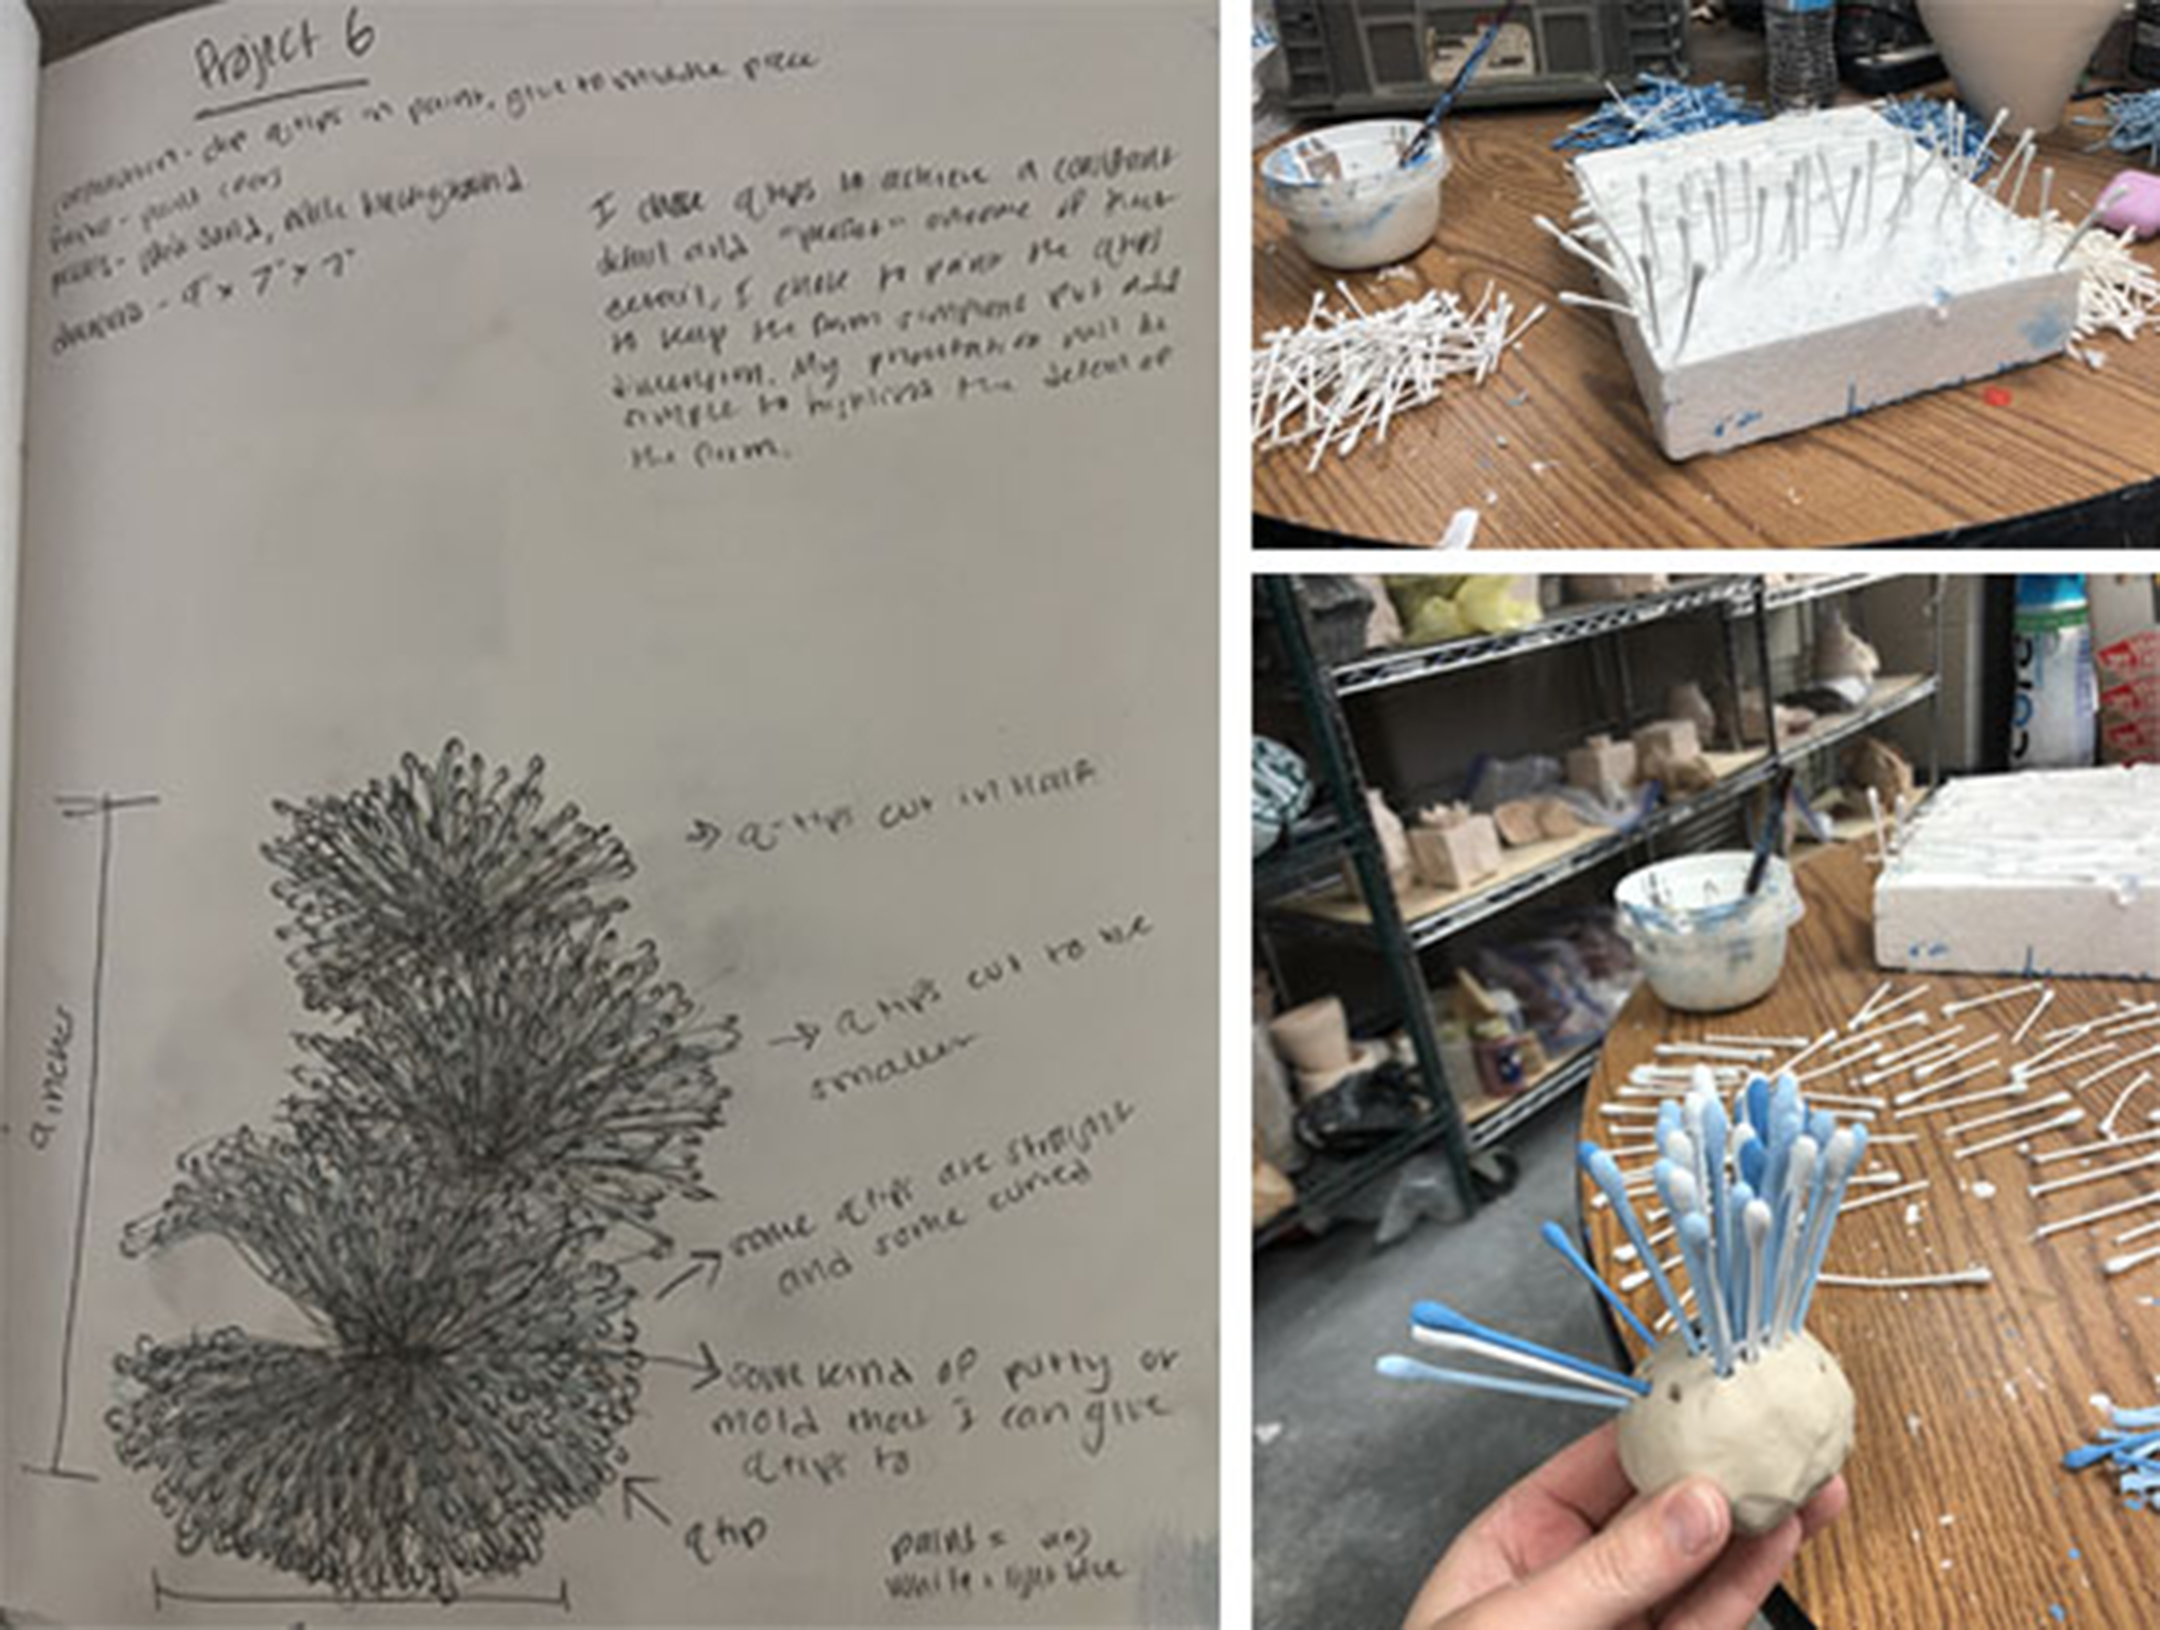 process images of the artist creating the Q-tip sculpture